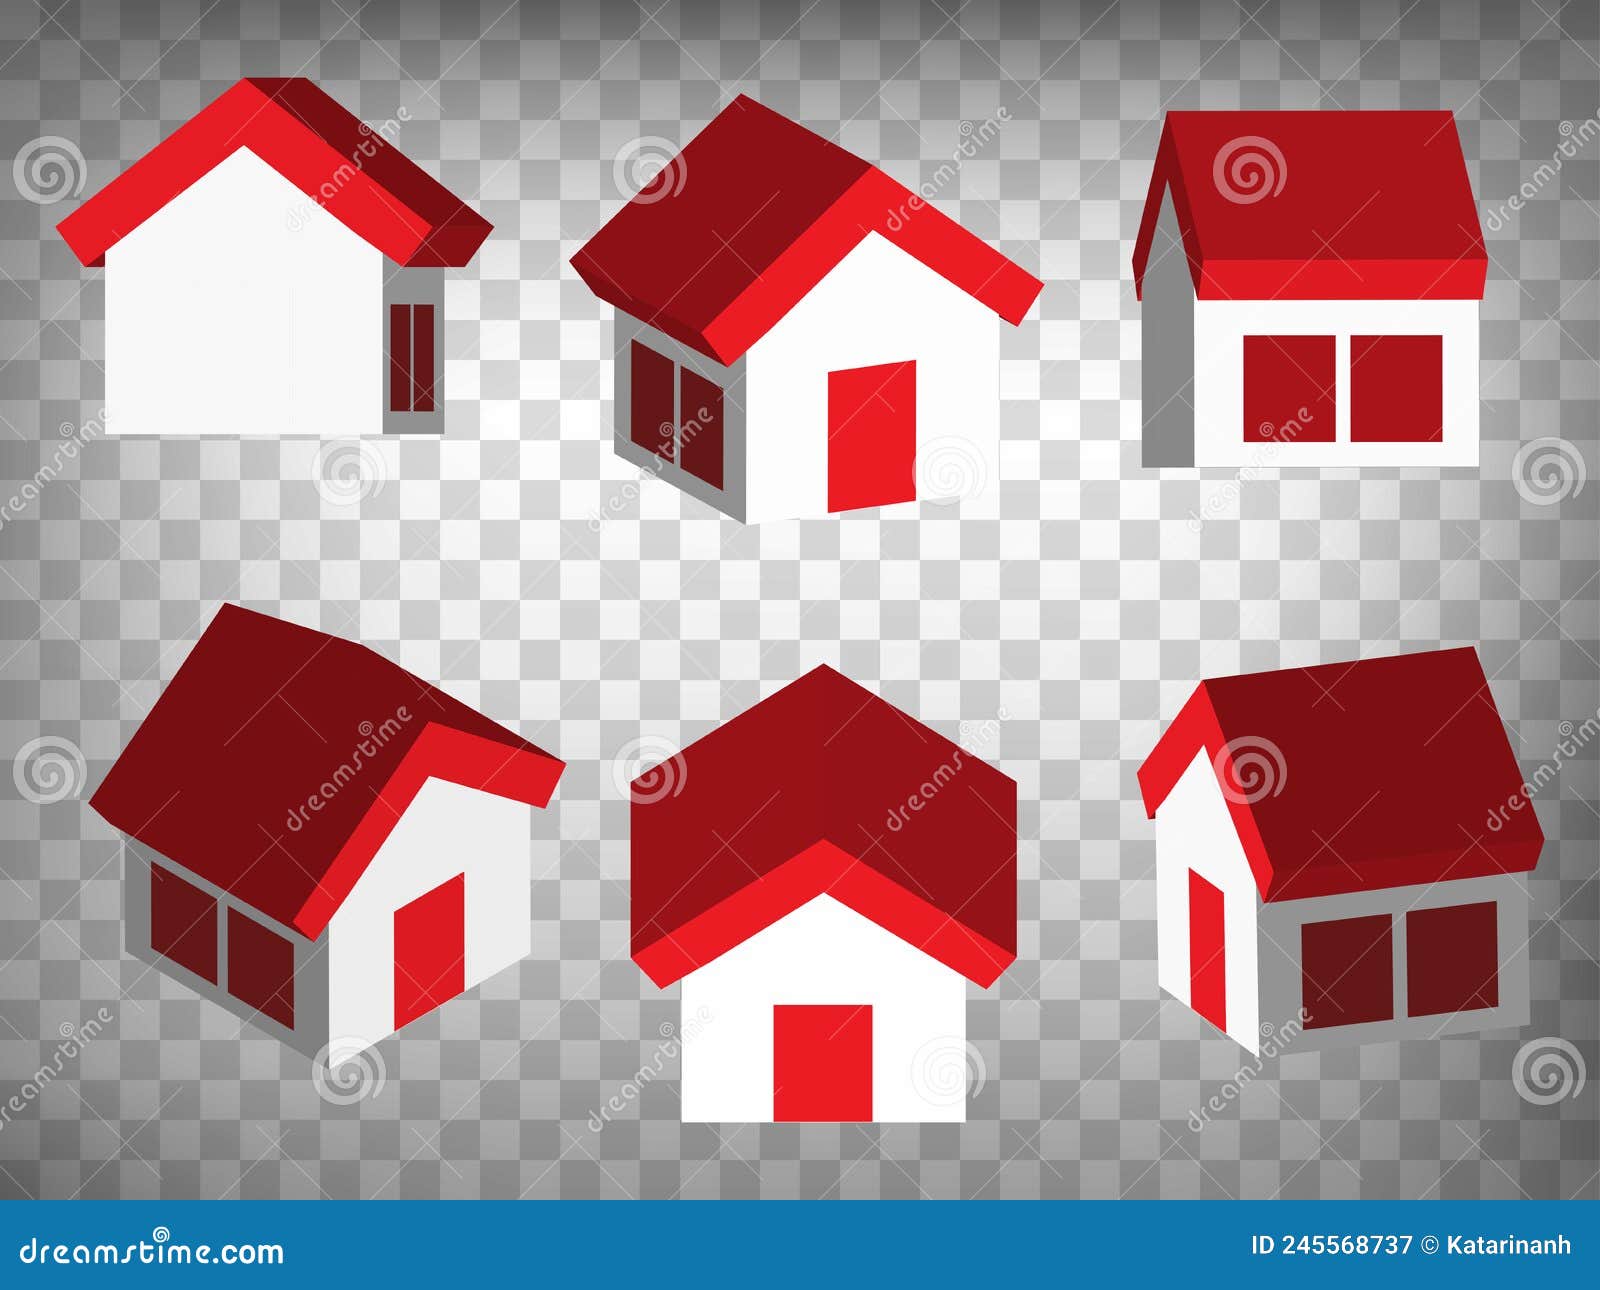 set of abstract 3d  houses icons. 3d house model with red roof and windows. house 3d icon  with different views and an